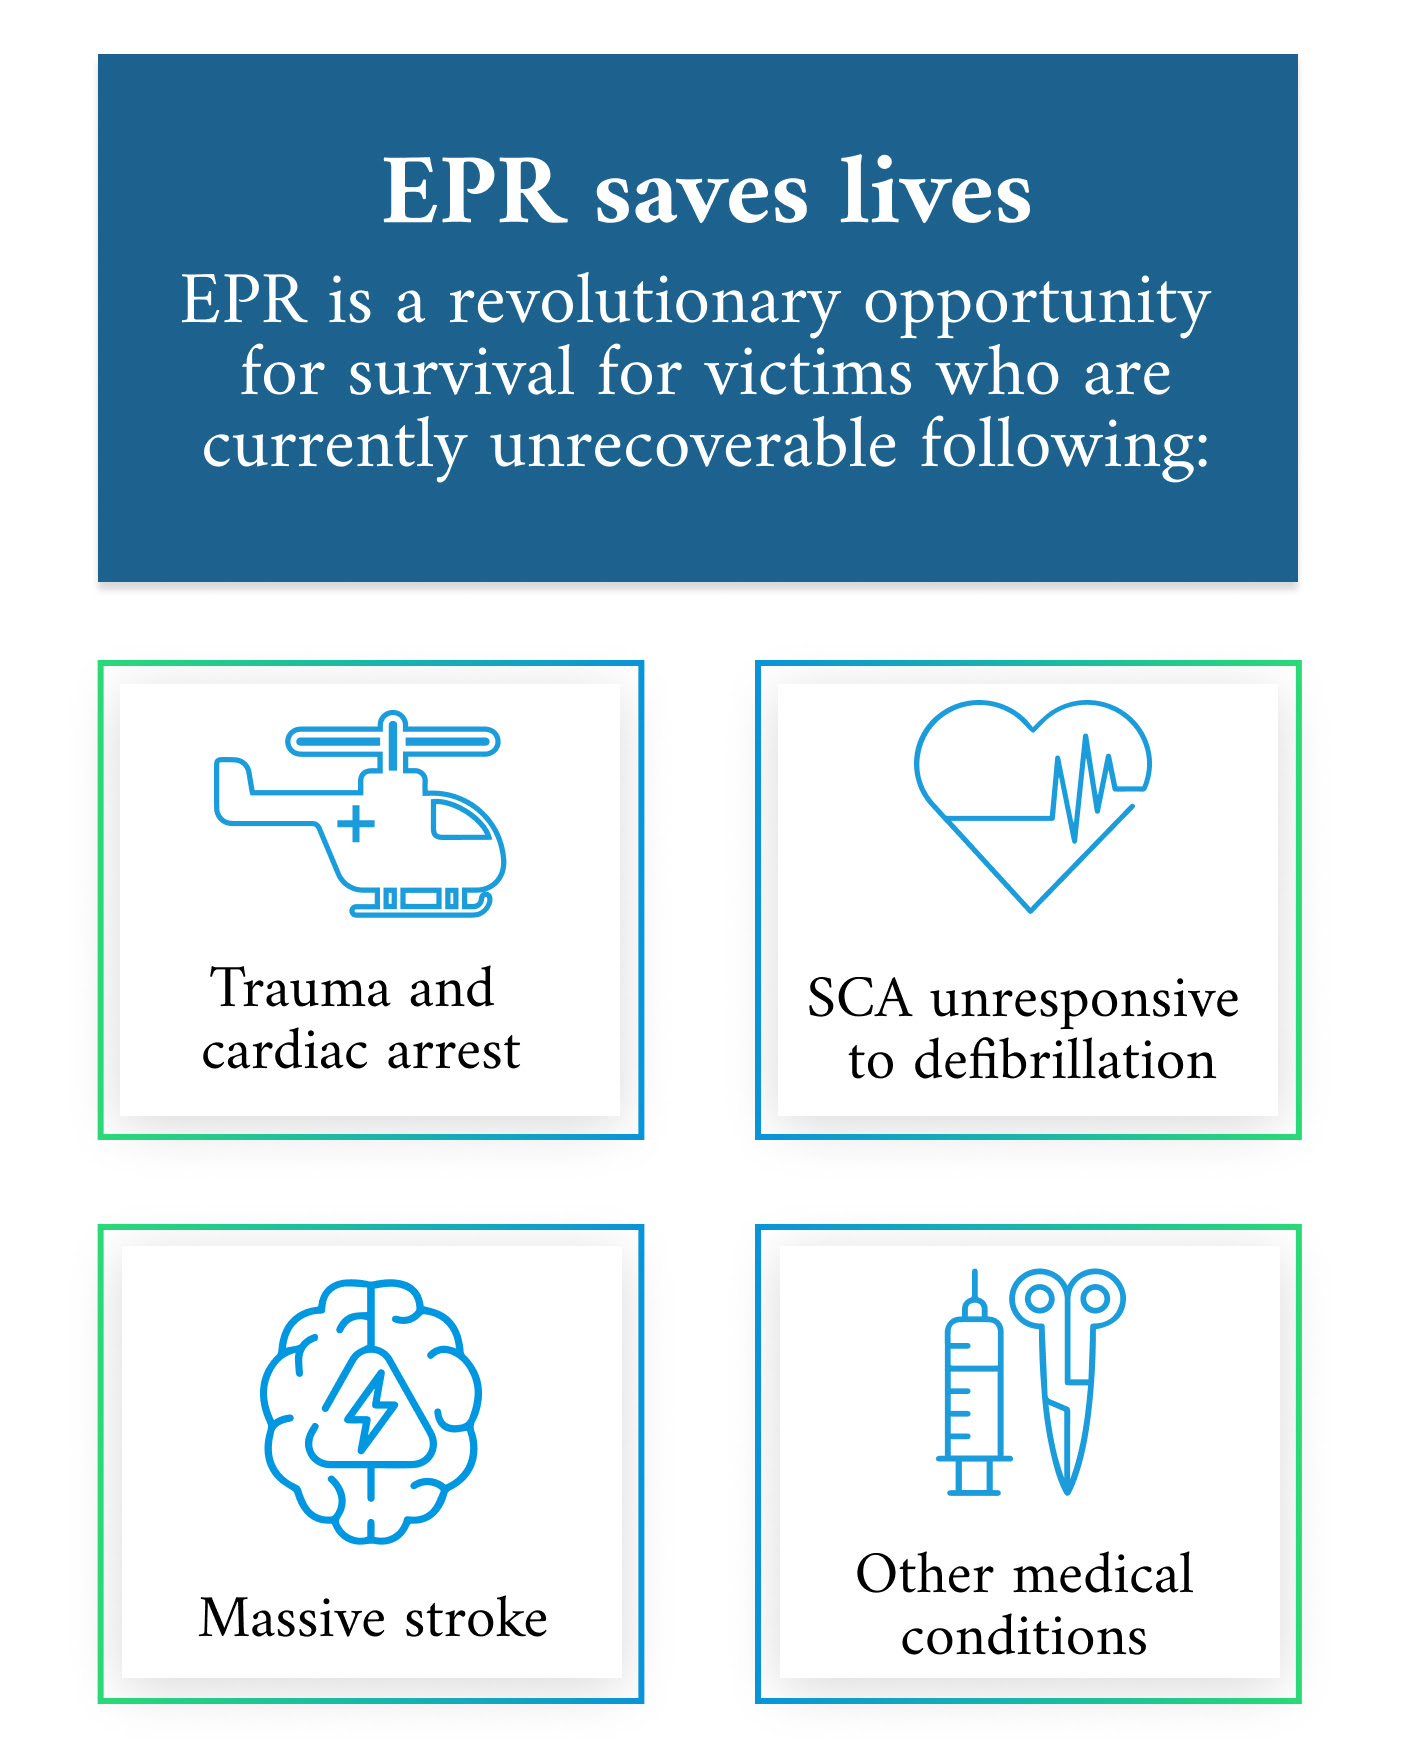 EPR is a revolutionary
opportunity for survival victims